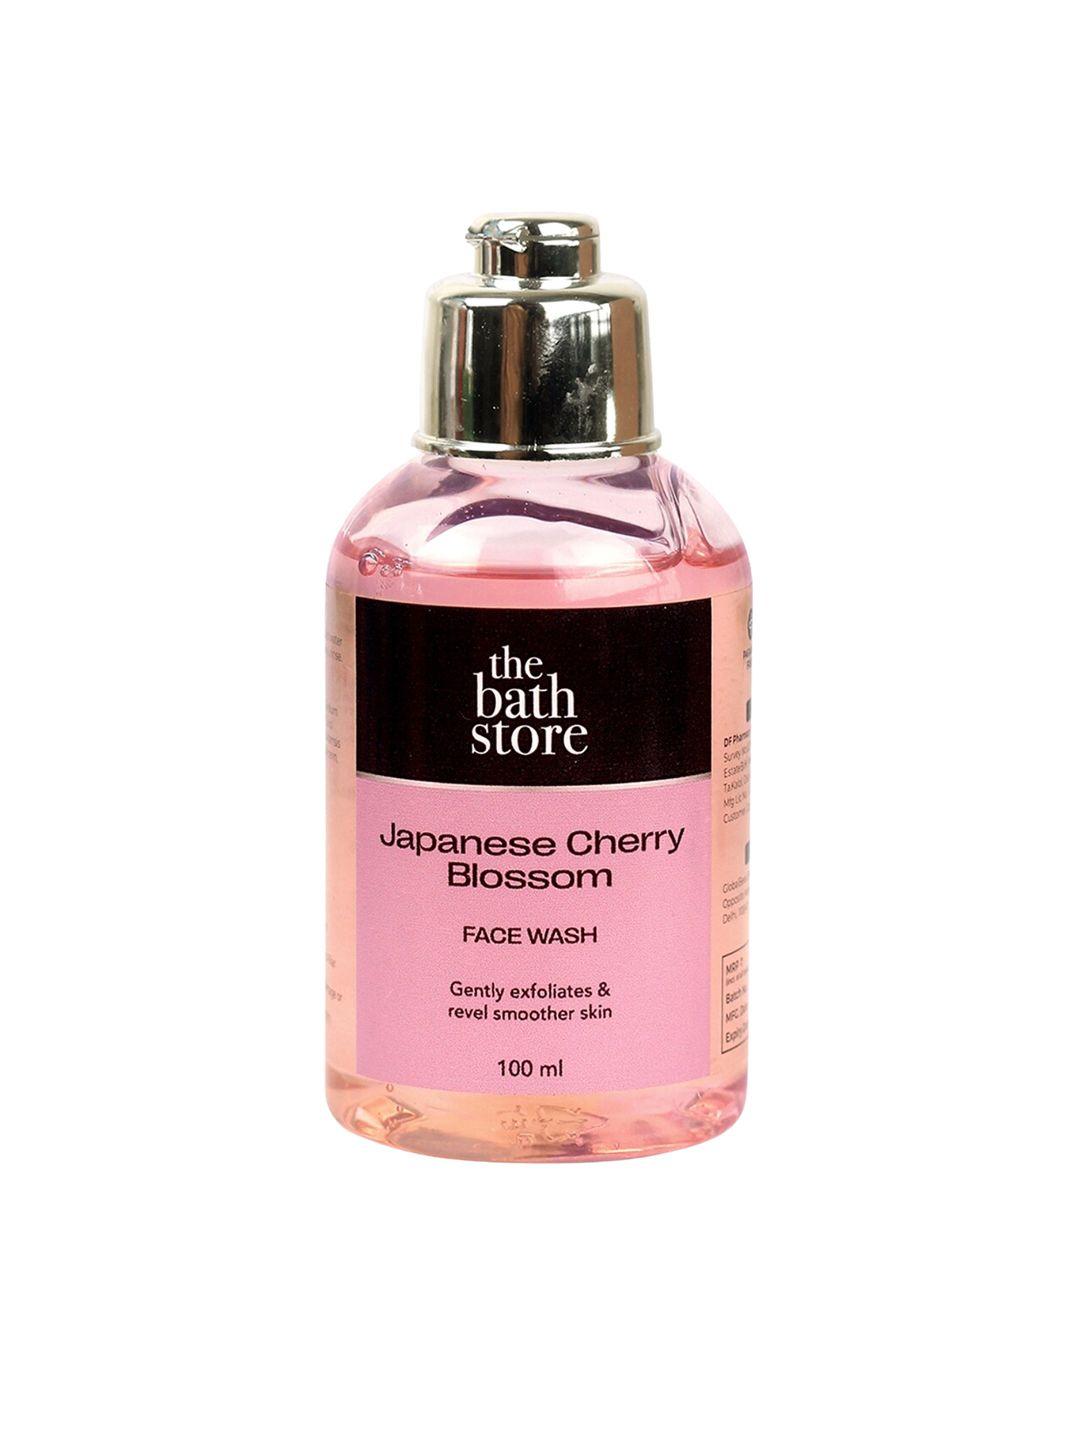 the bath store japanese cherry blossom face wash to gently exfoliate - 100 ml